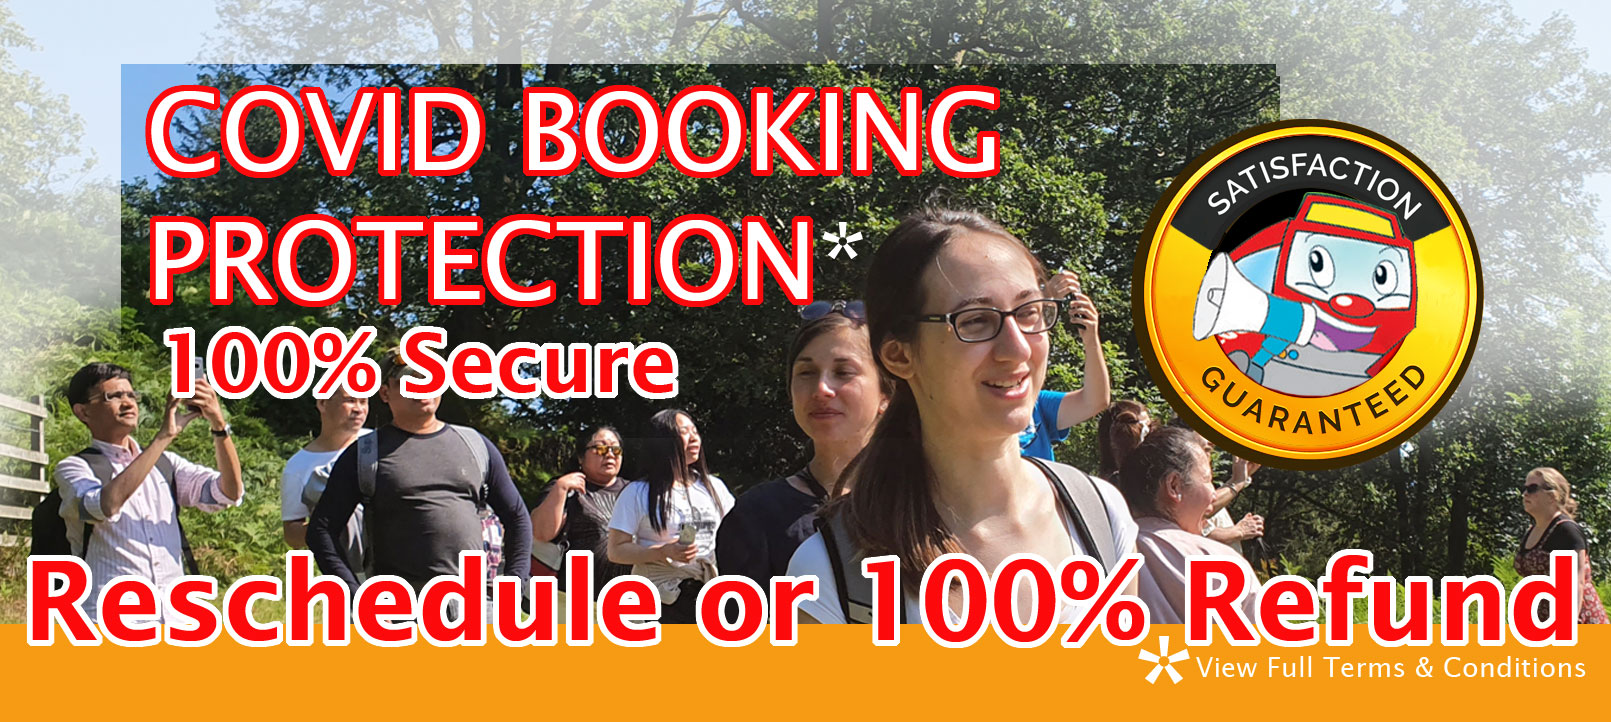 Covid Booking Protection